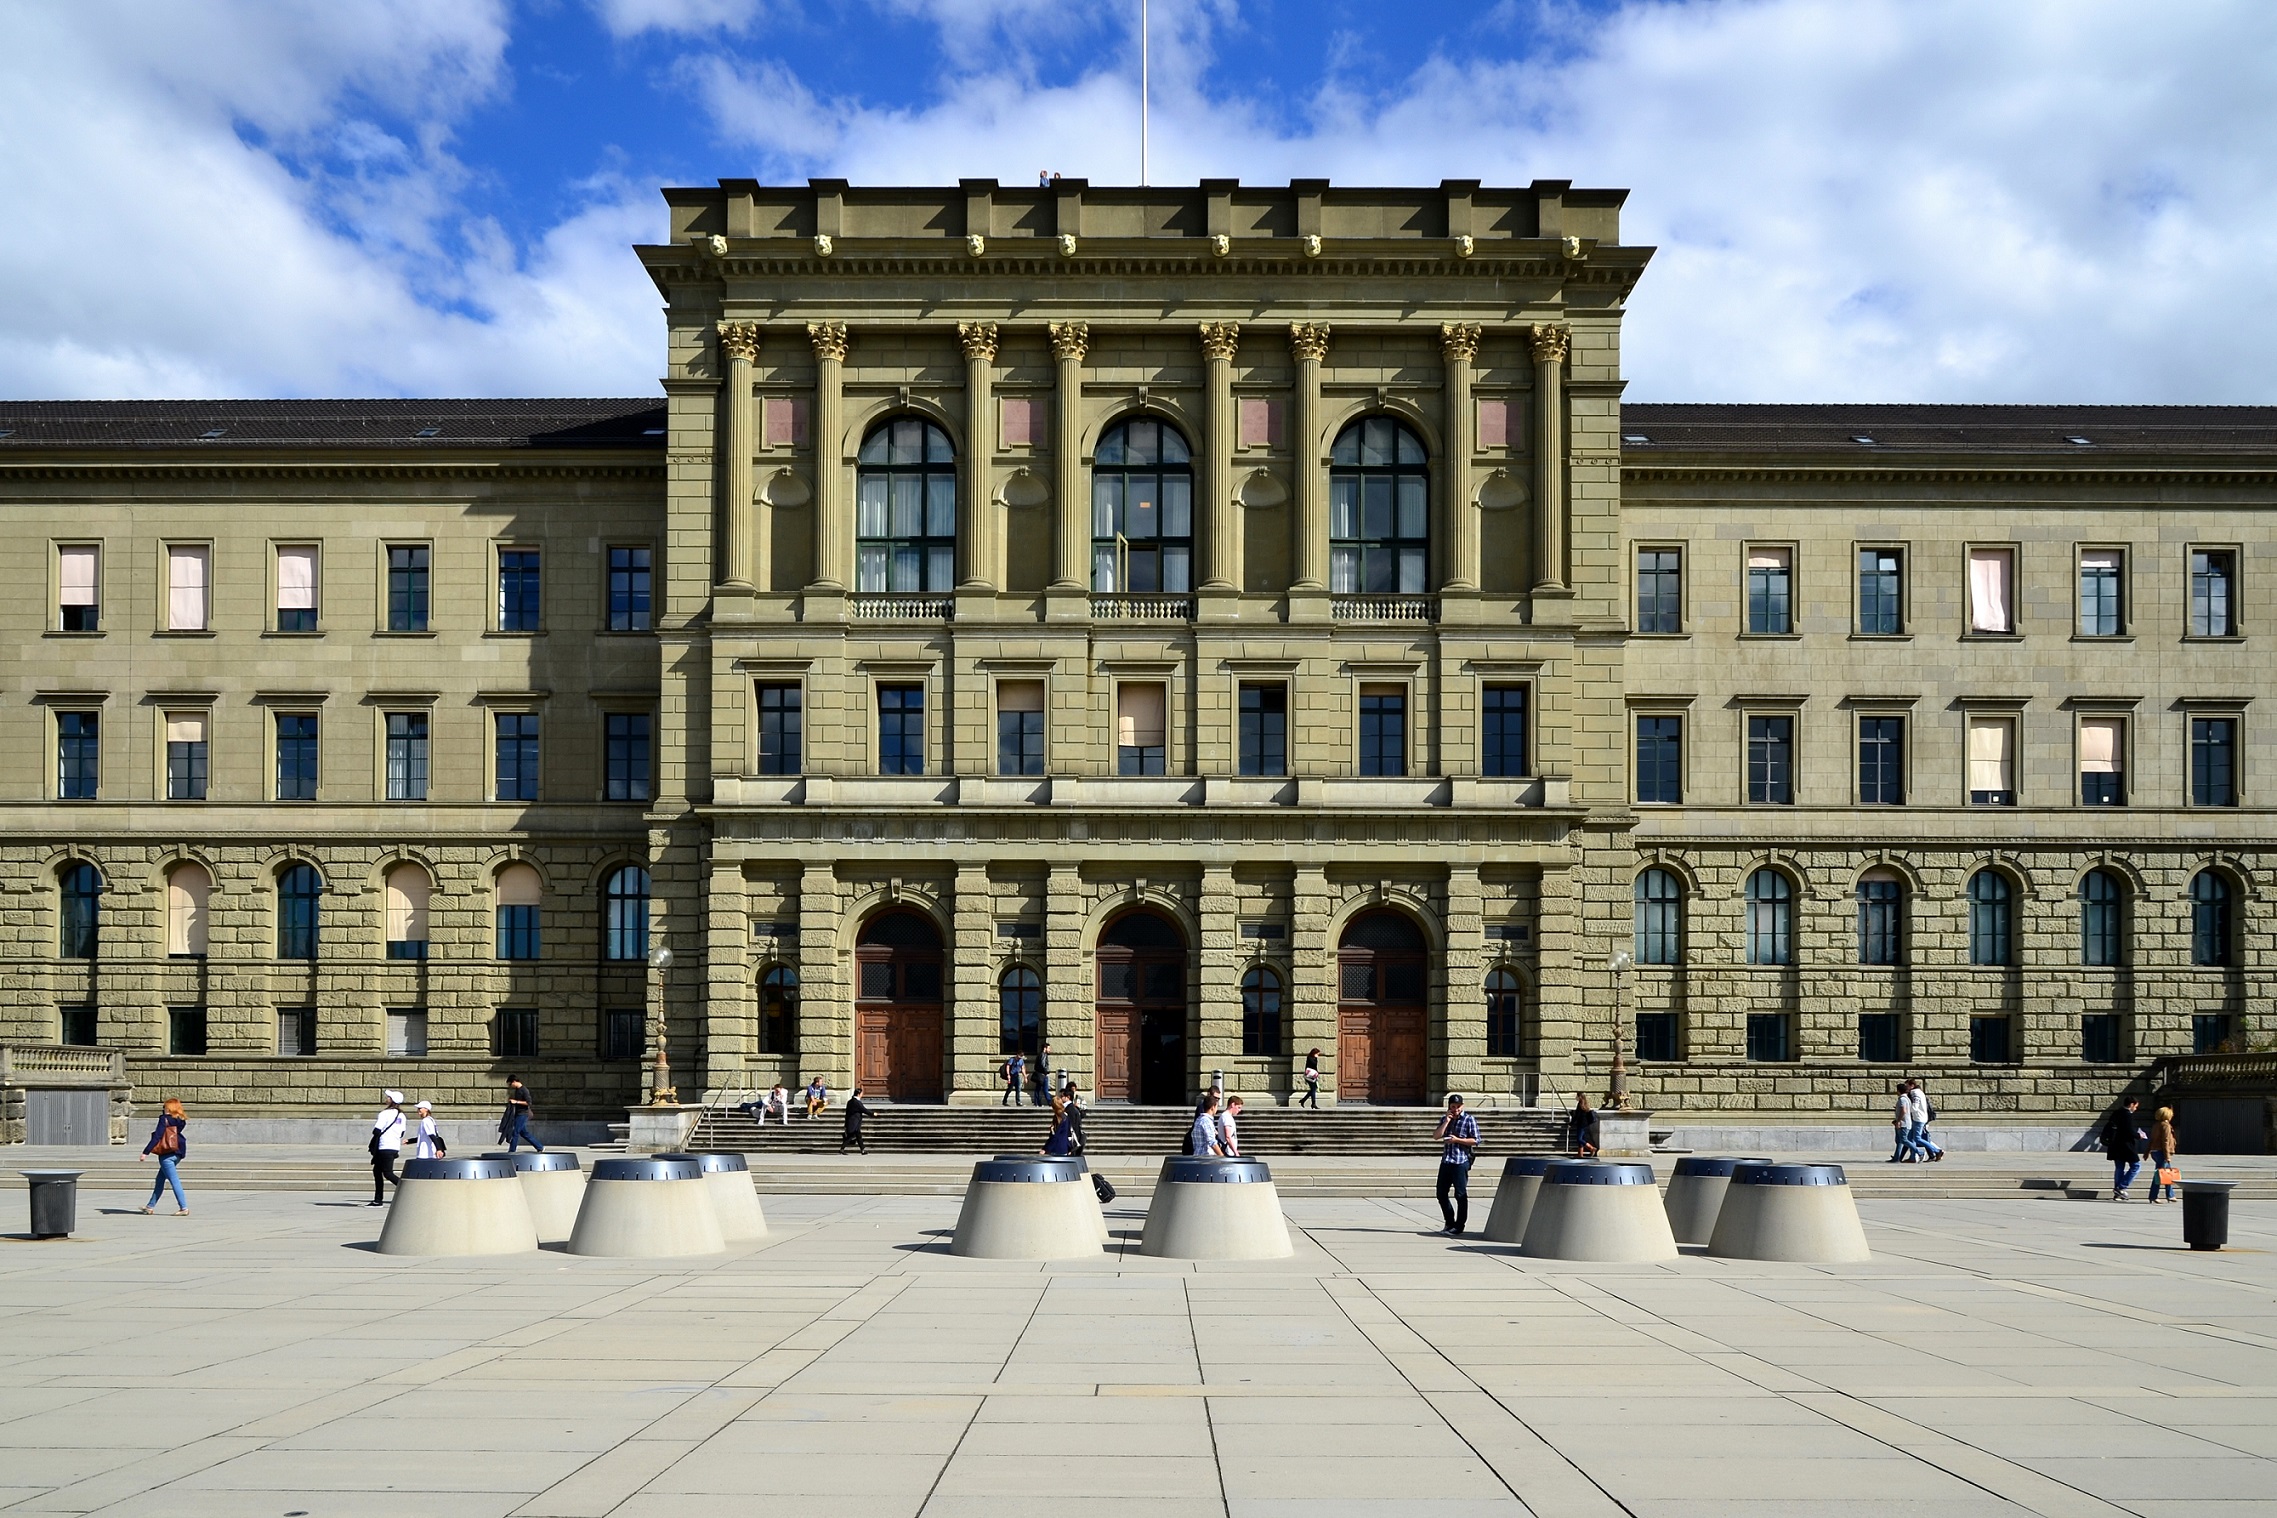 eth zurich chemical engineering ranking in the world